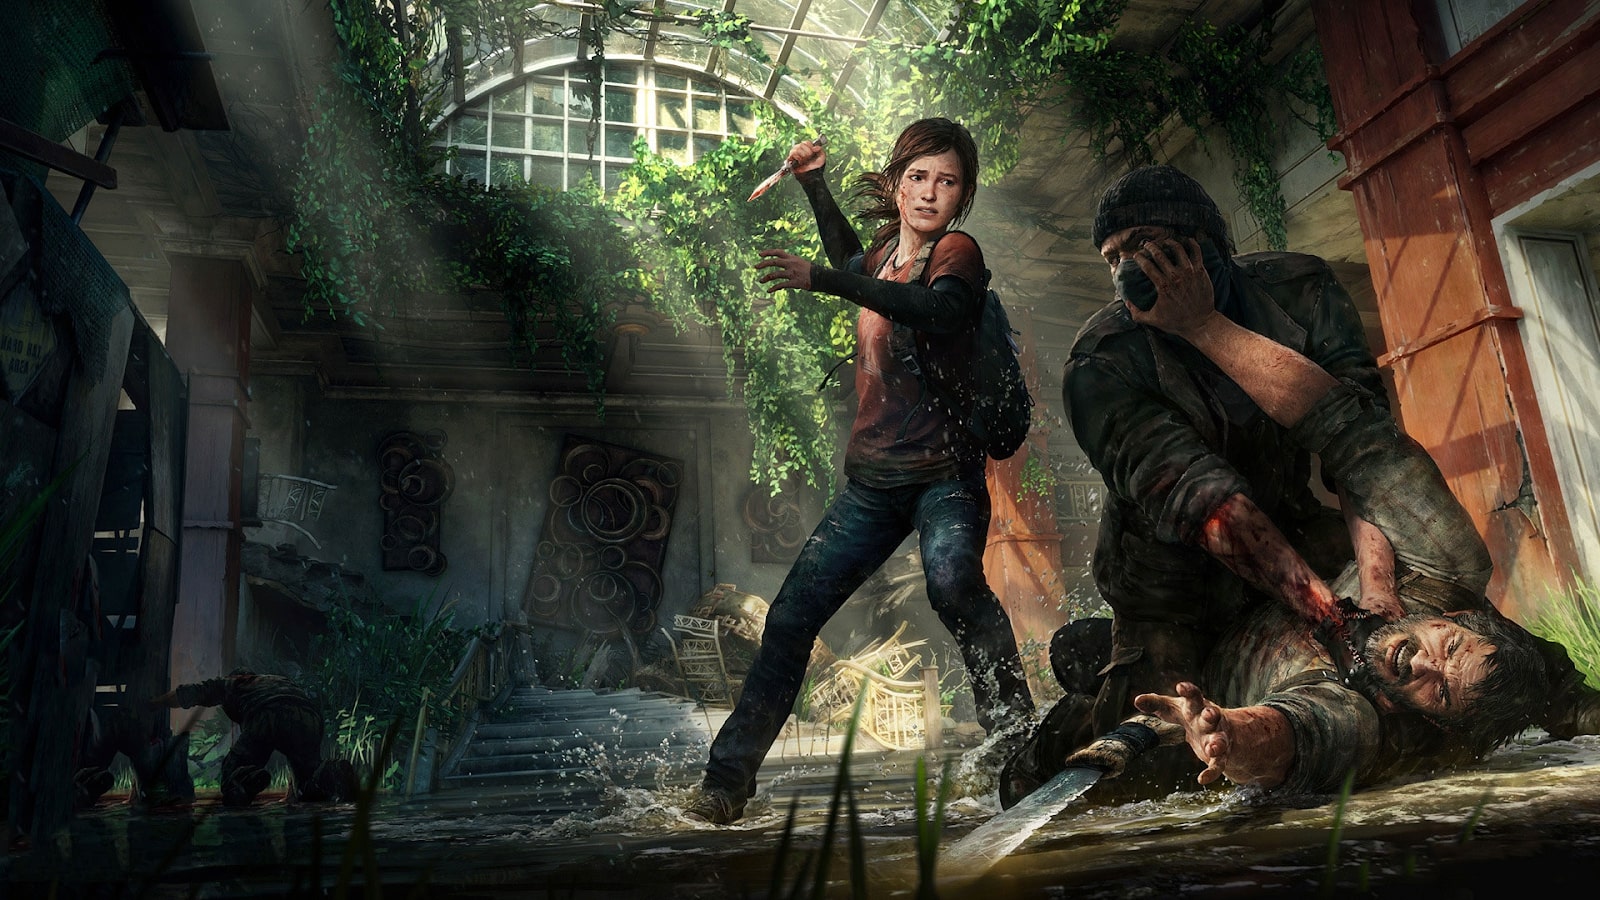 11 Games Like The Last of Us that Will Test Your Survival Skills